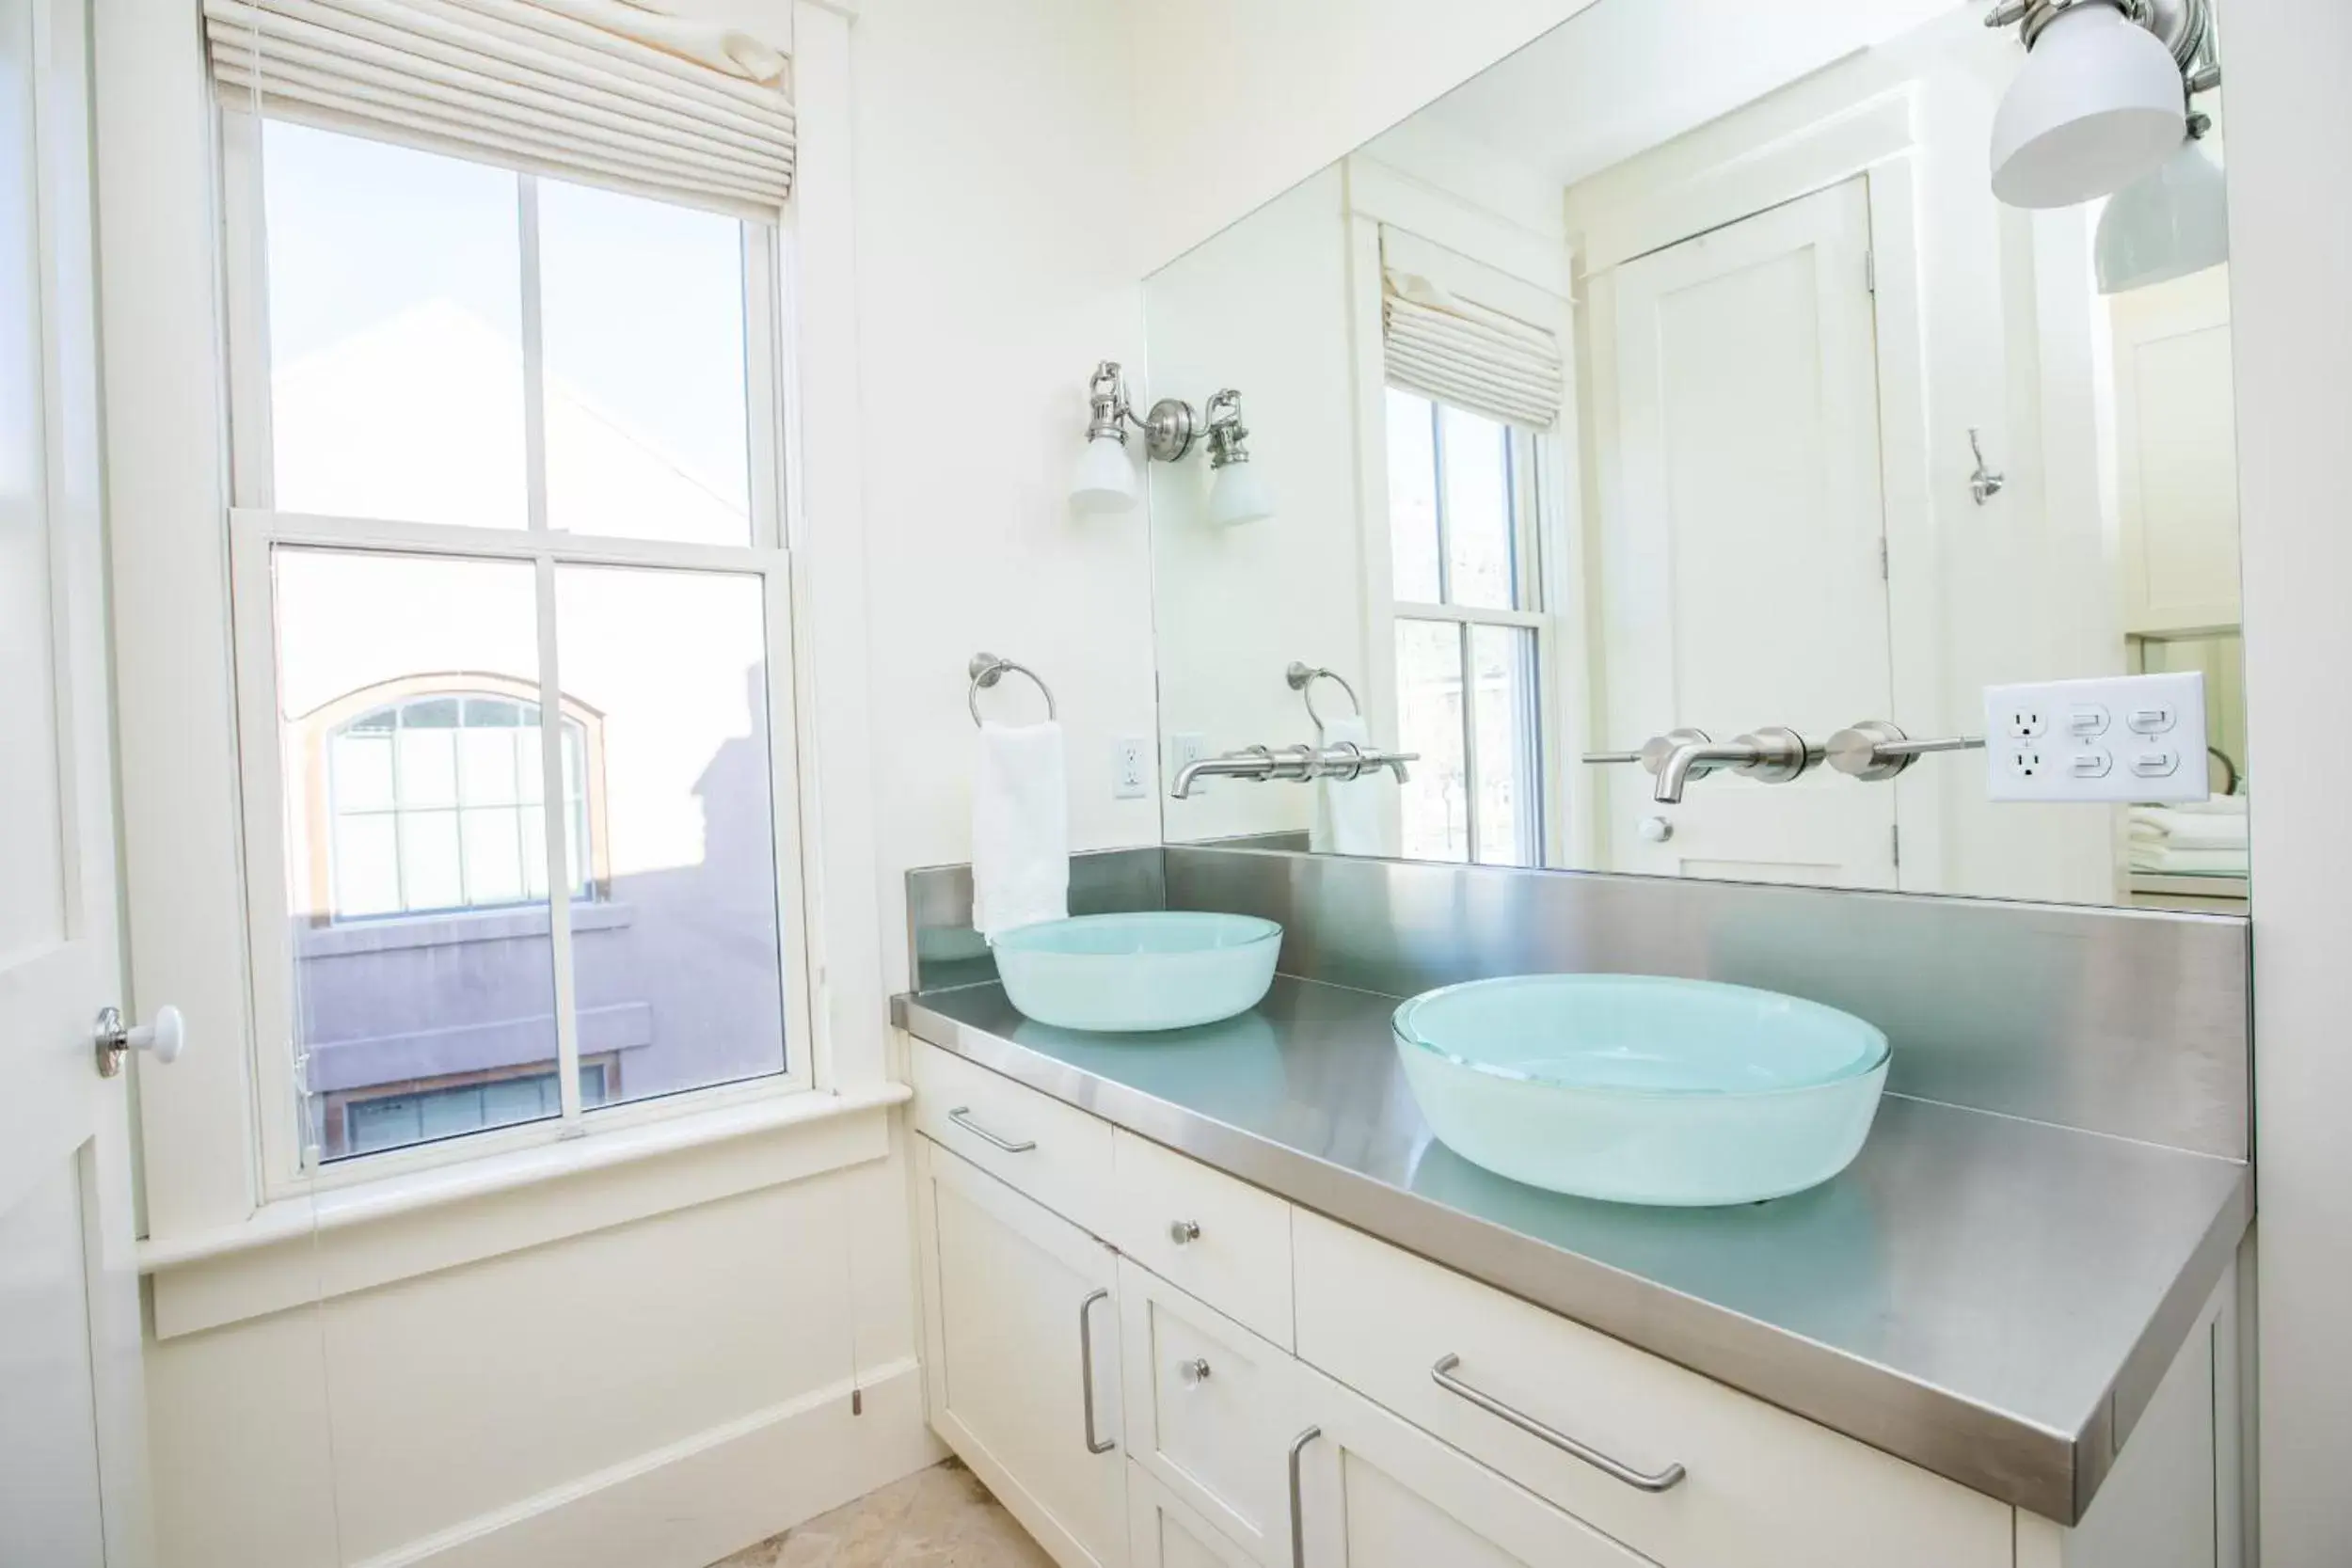 Bathroom in South Main Residences by Surf Hotel